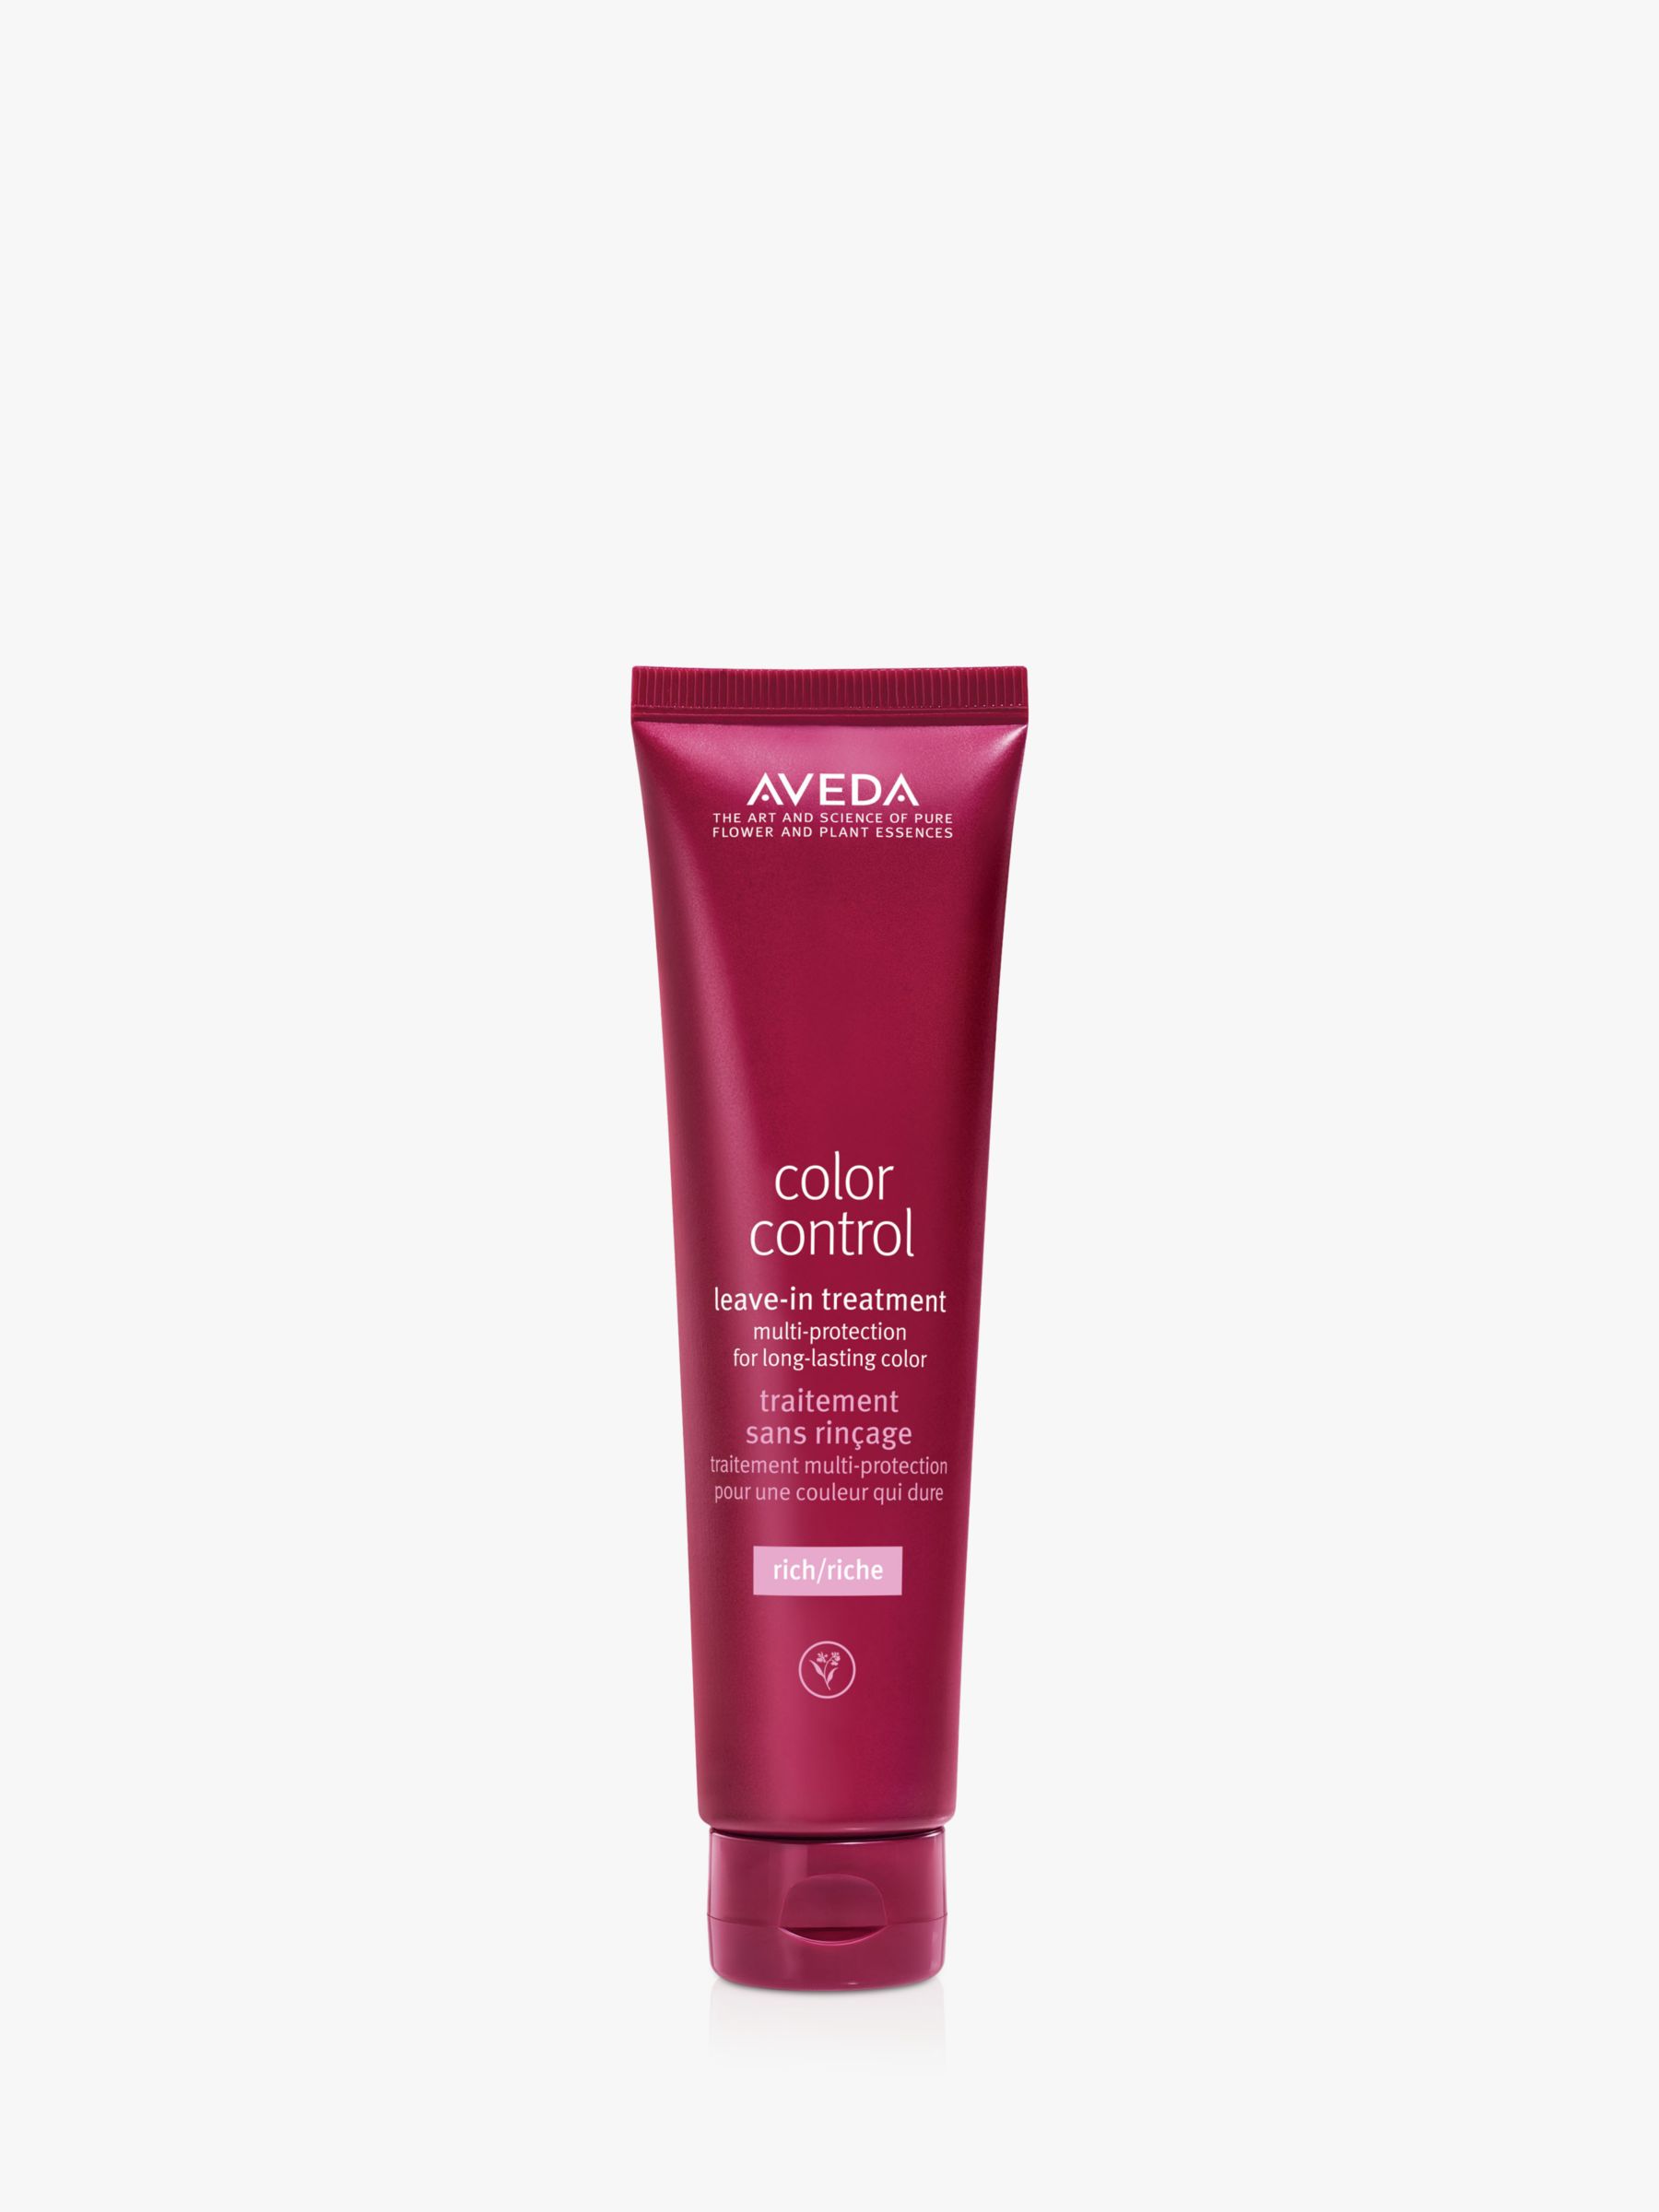 Aveda Colour Control Leave-In Treatment, Rich, 100ml 1